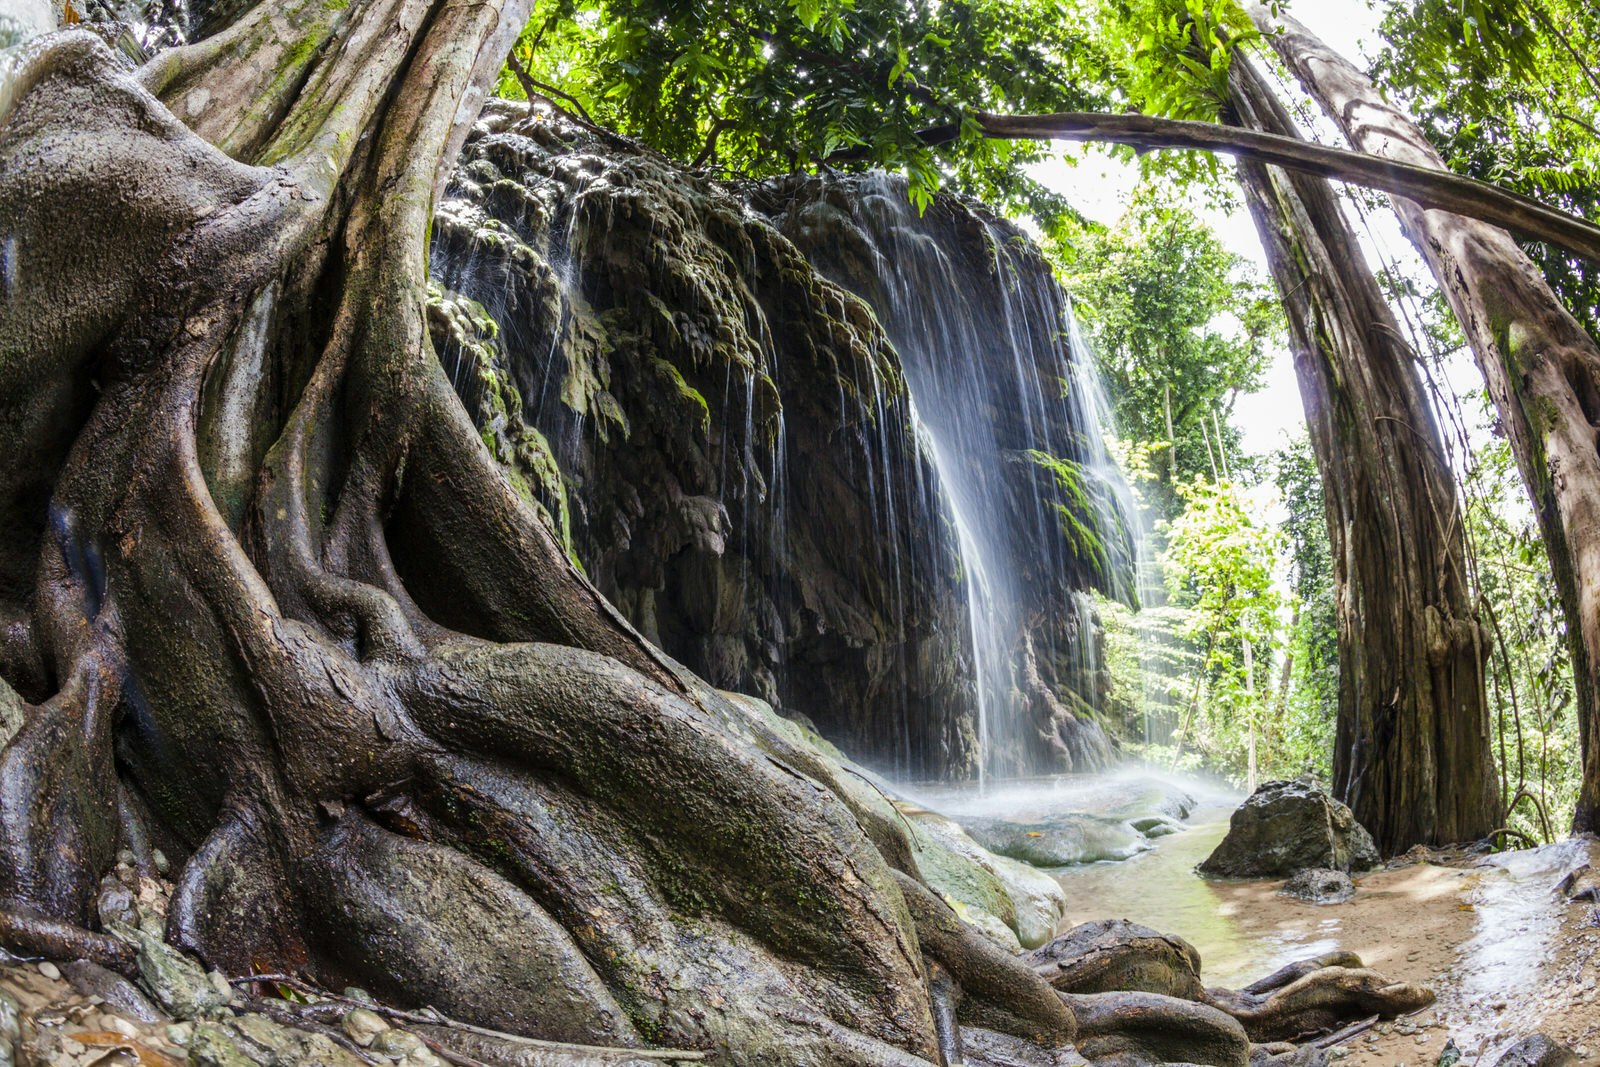 Water cascades down a moss-covered section of rock and trees within a jungle; roots of the trees almost crawl over each other